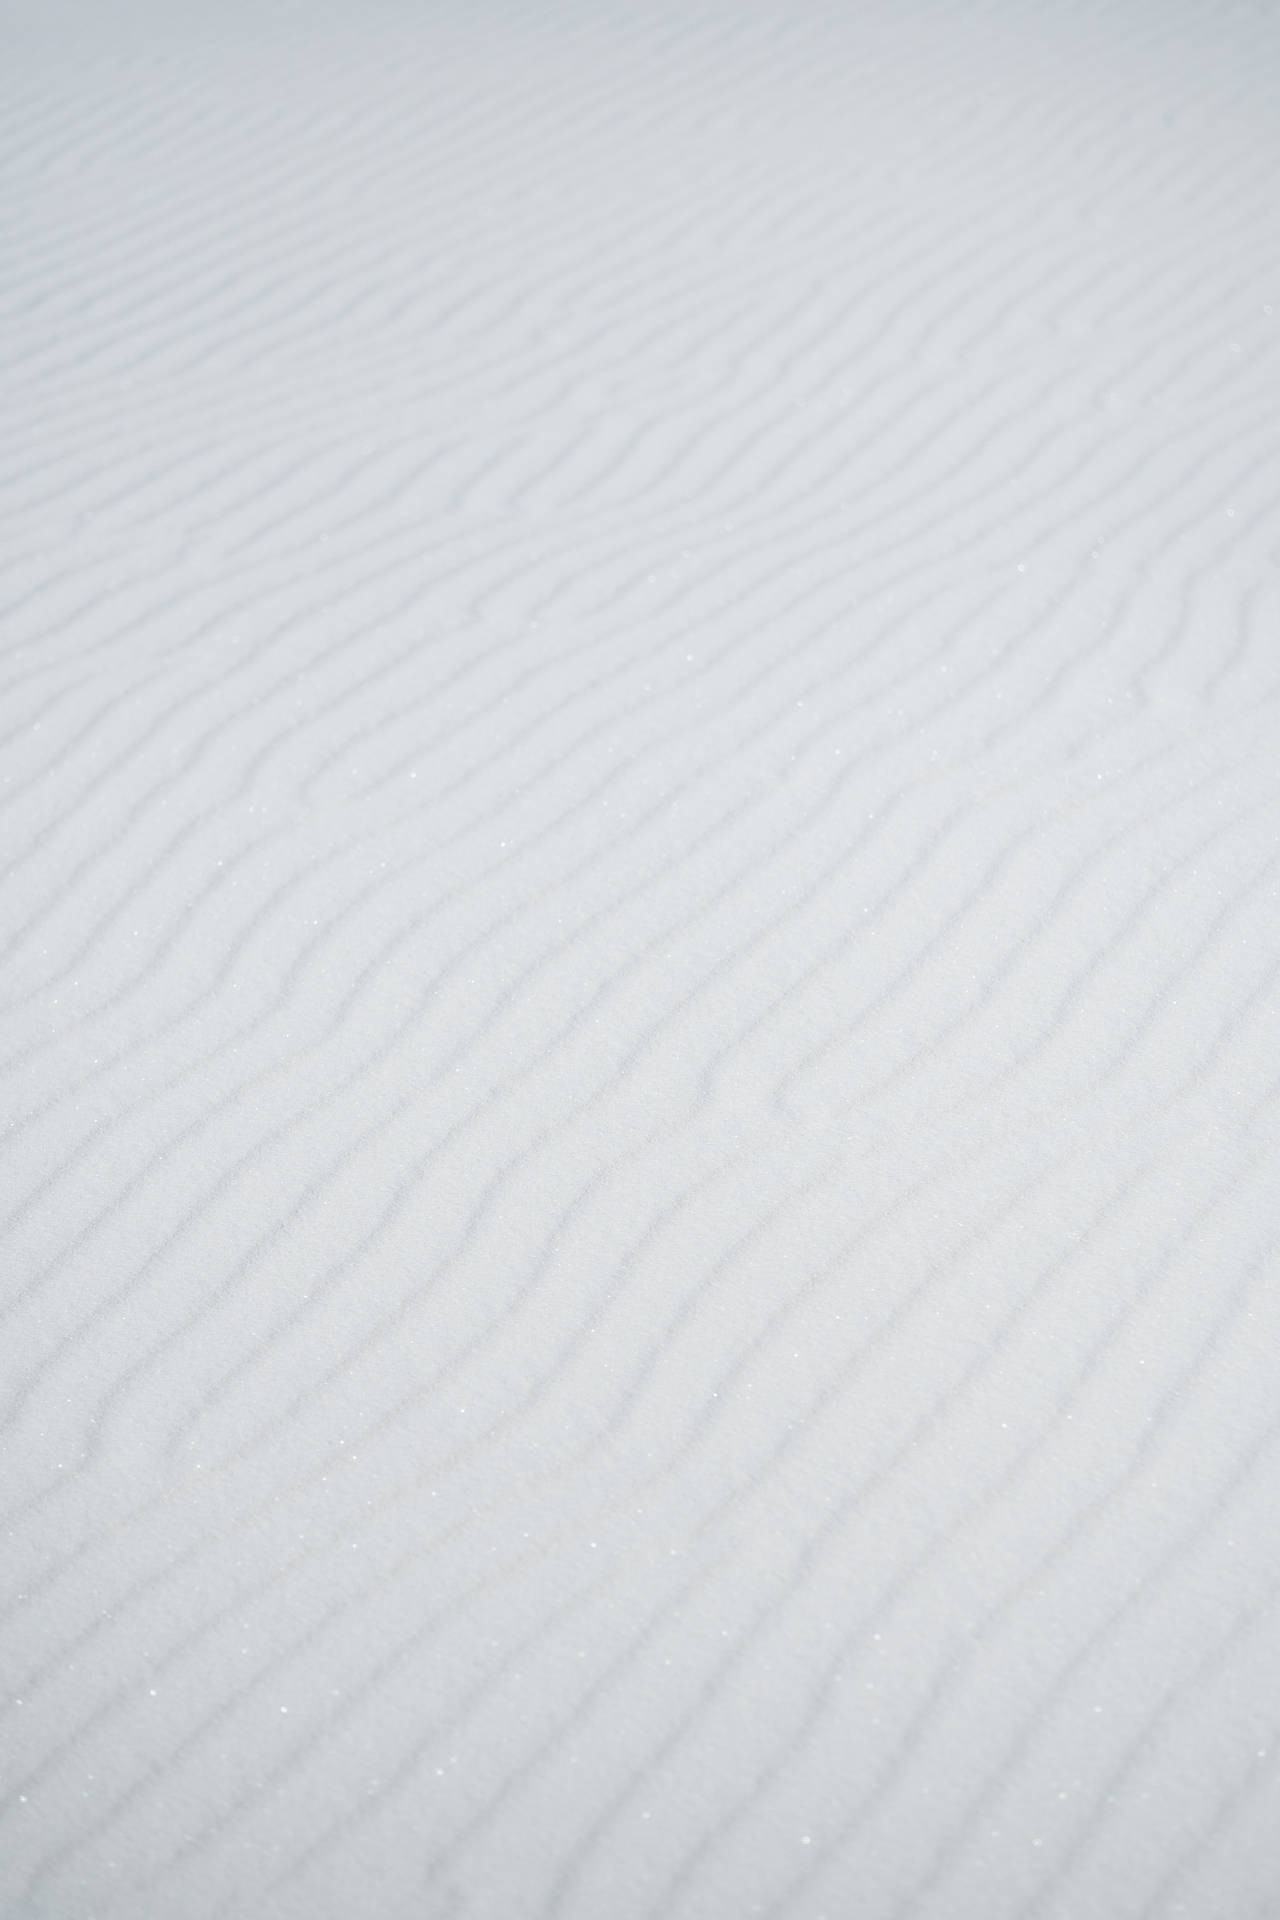 White Screen With Abstract Waves Wallpaper